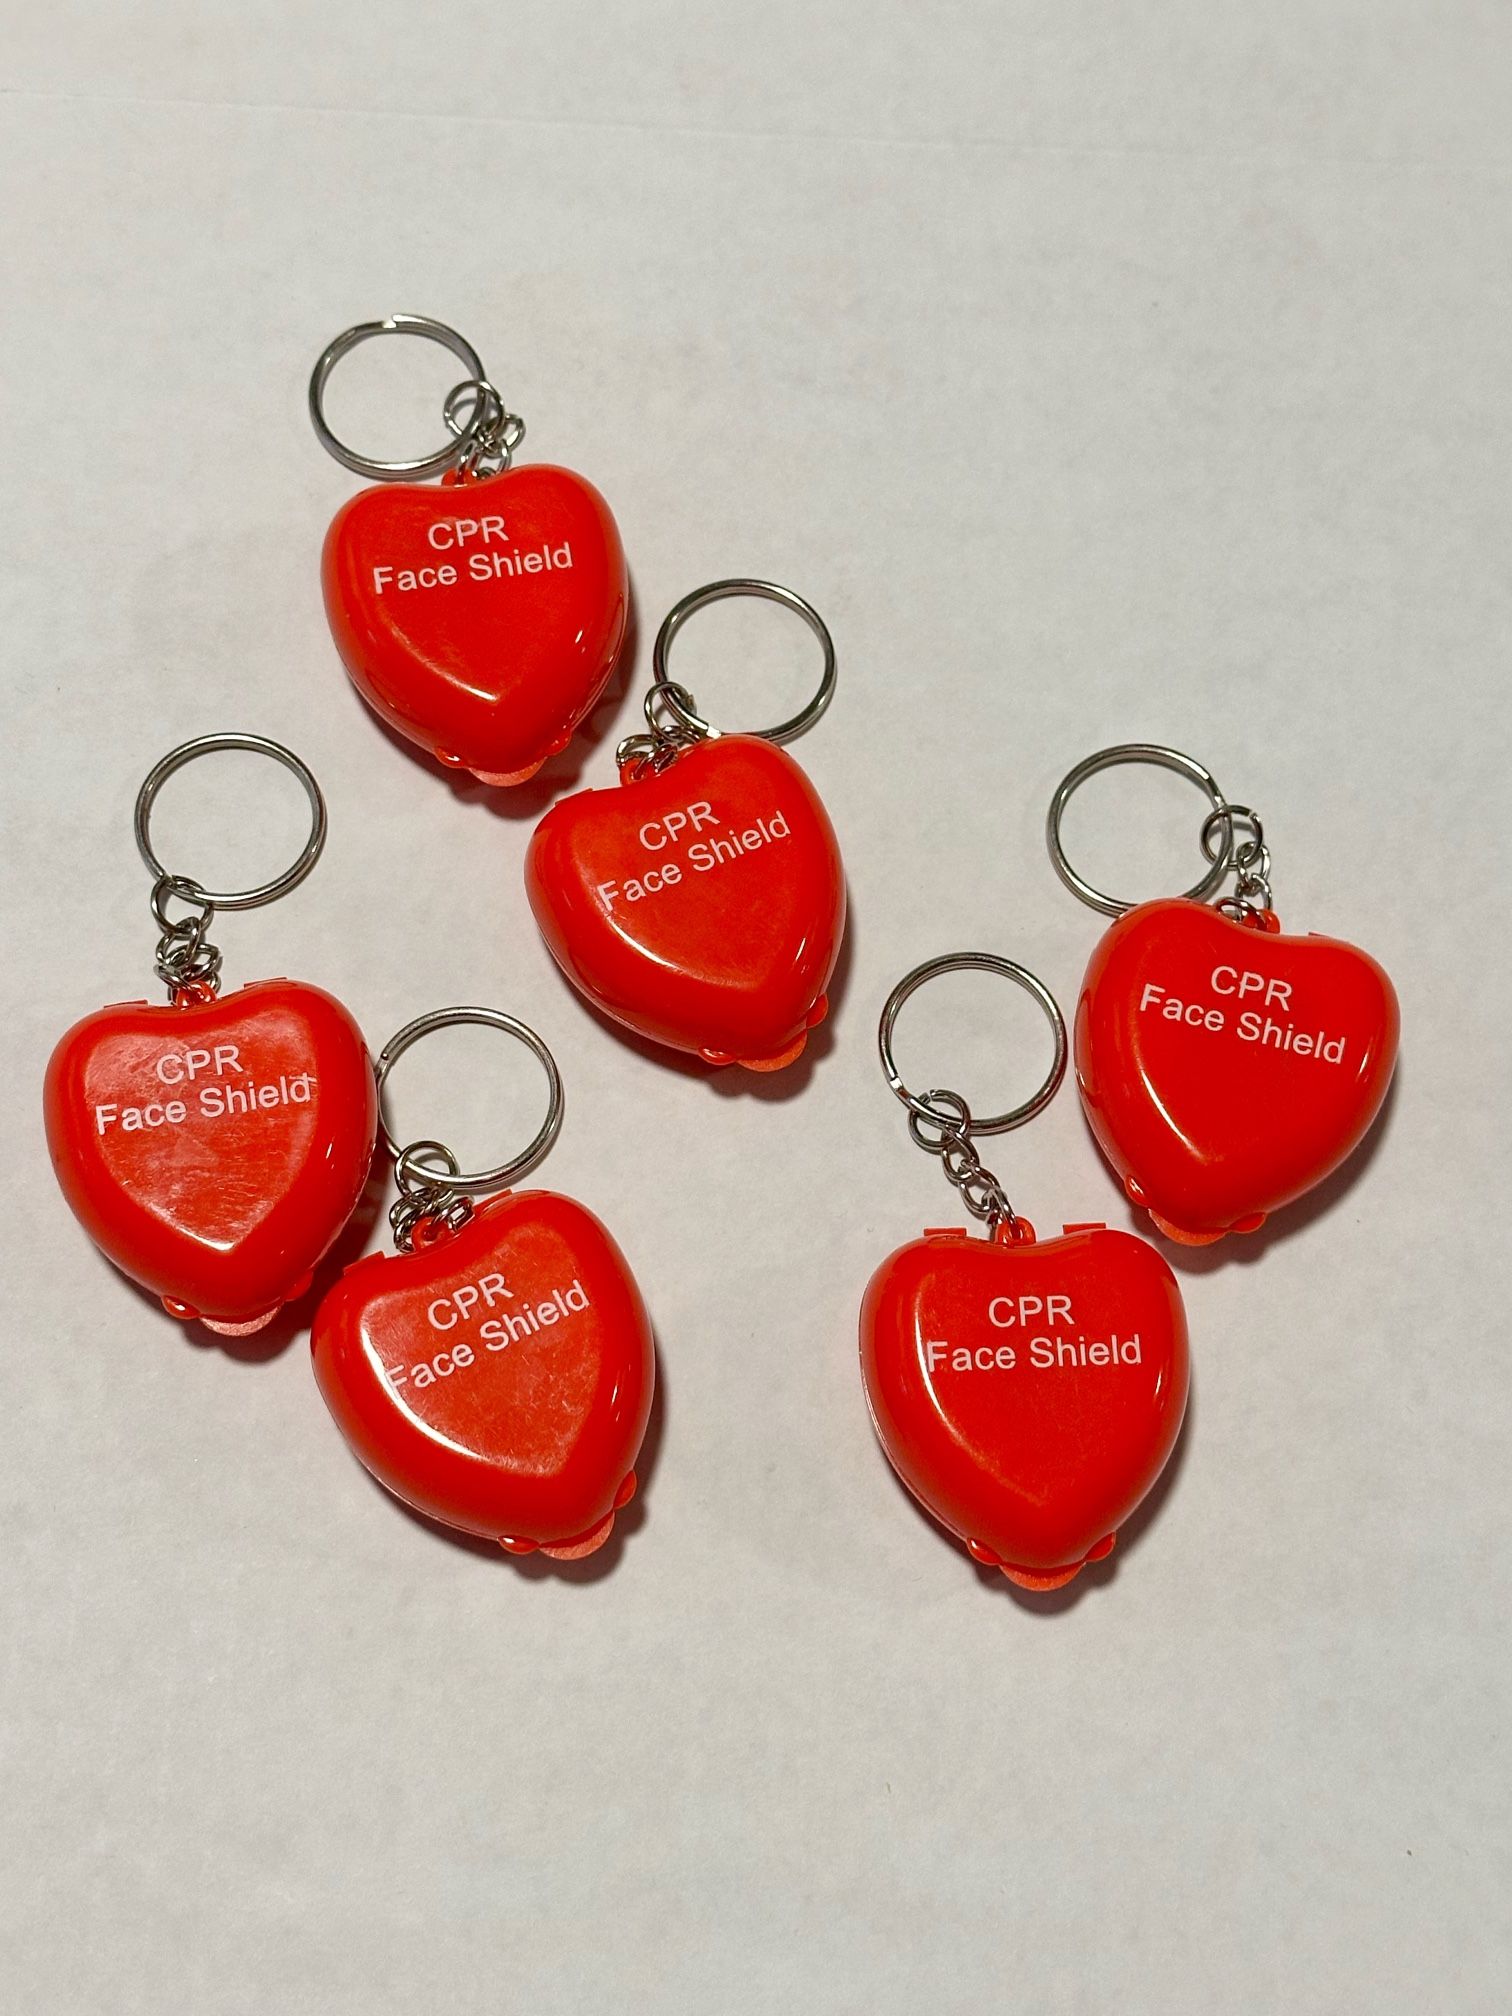 CPR Face Mask Key Chain ❤️